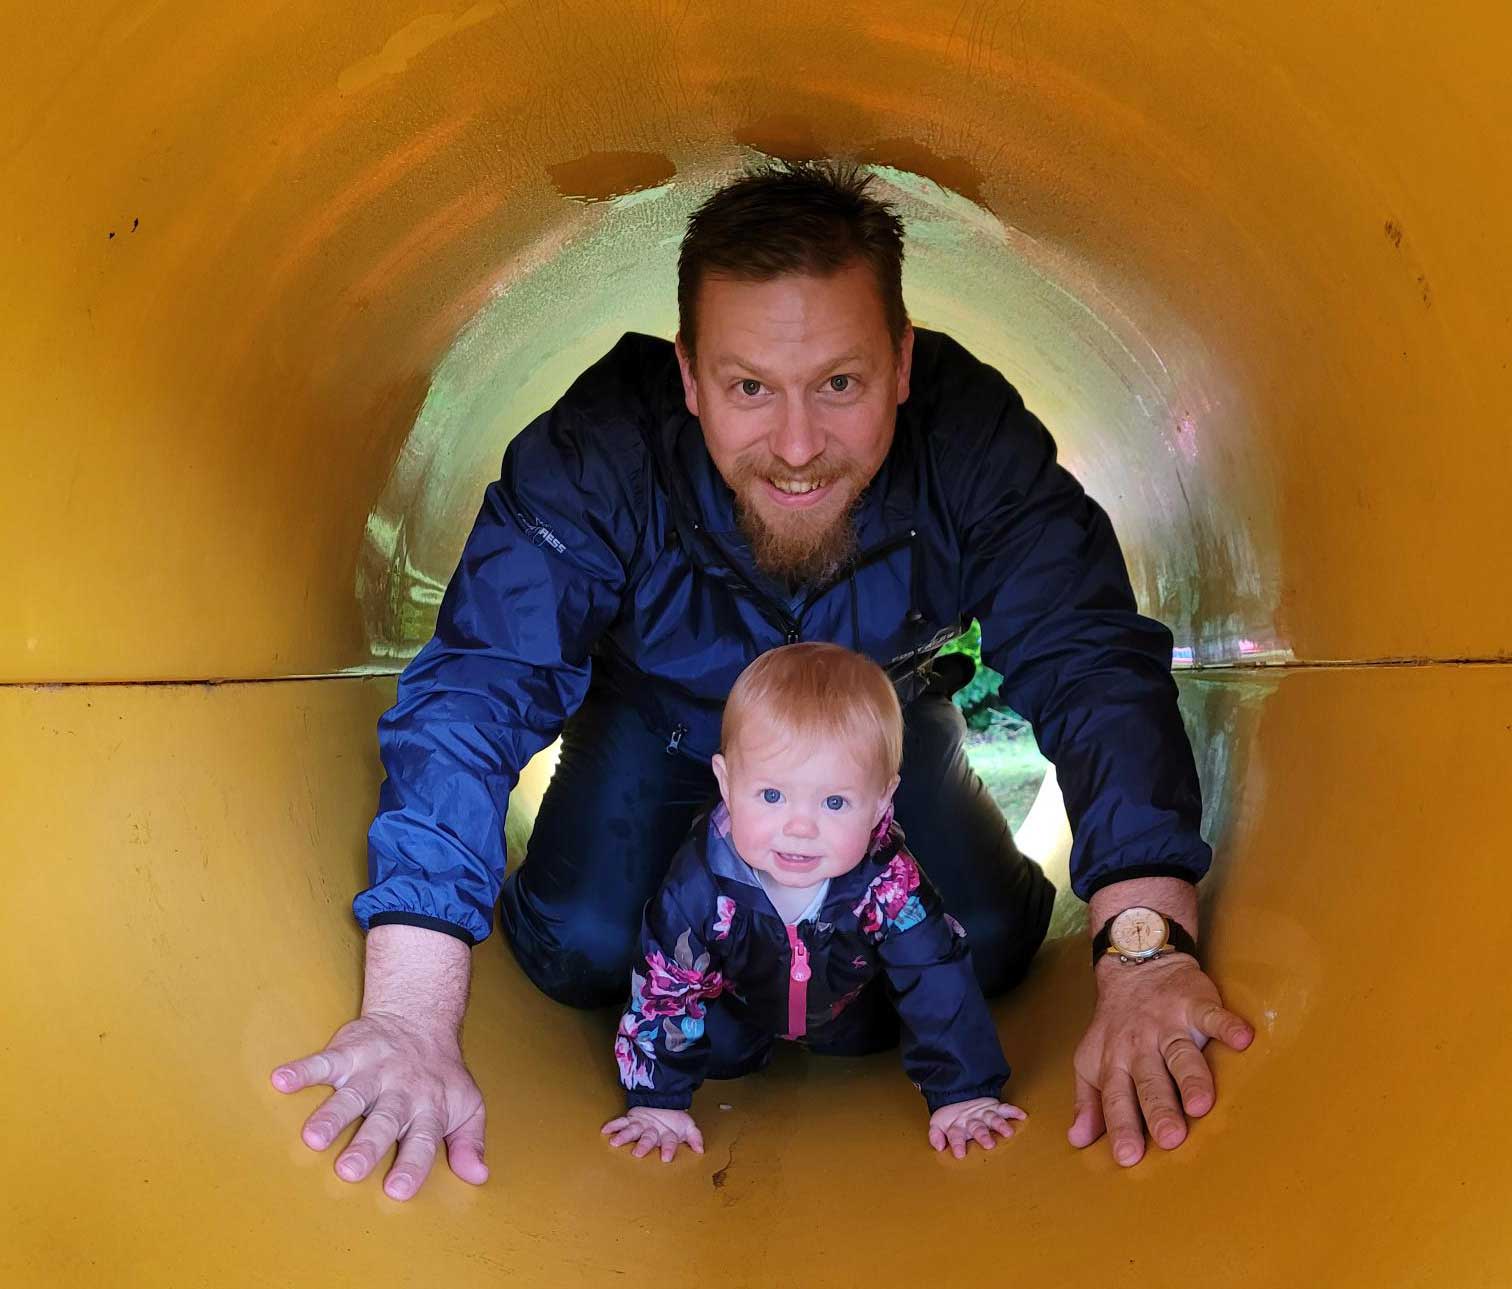 Baby and father in outdoor children's play area